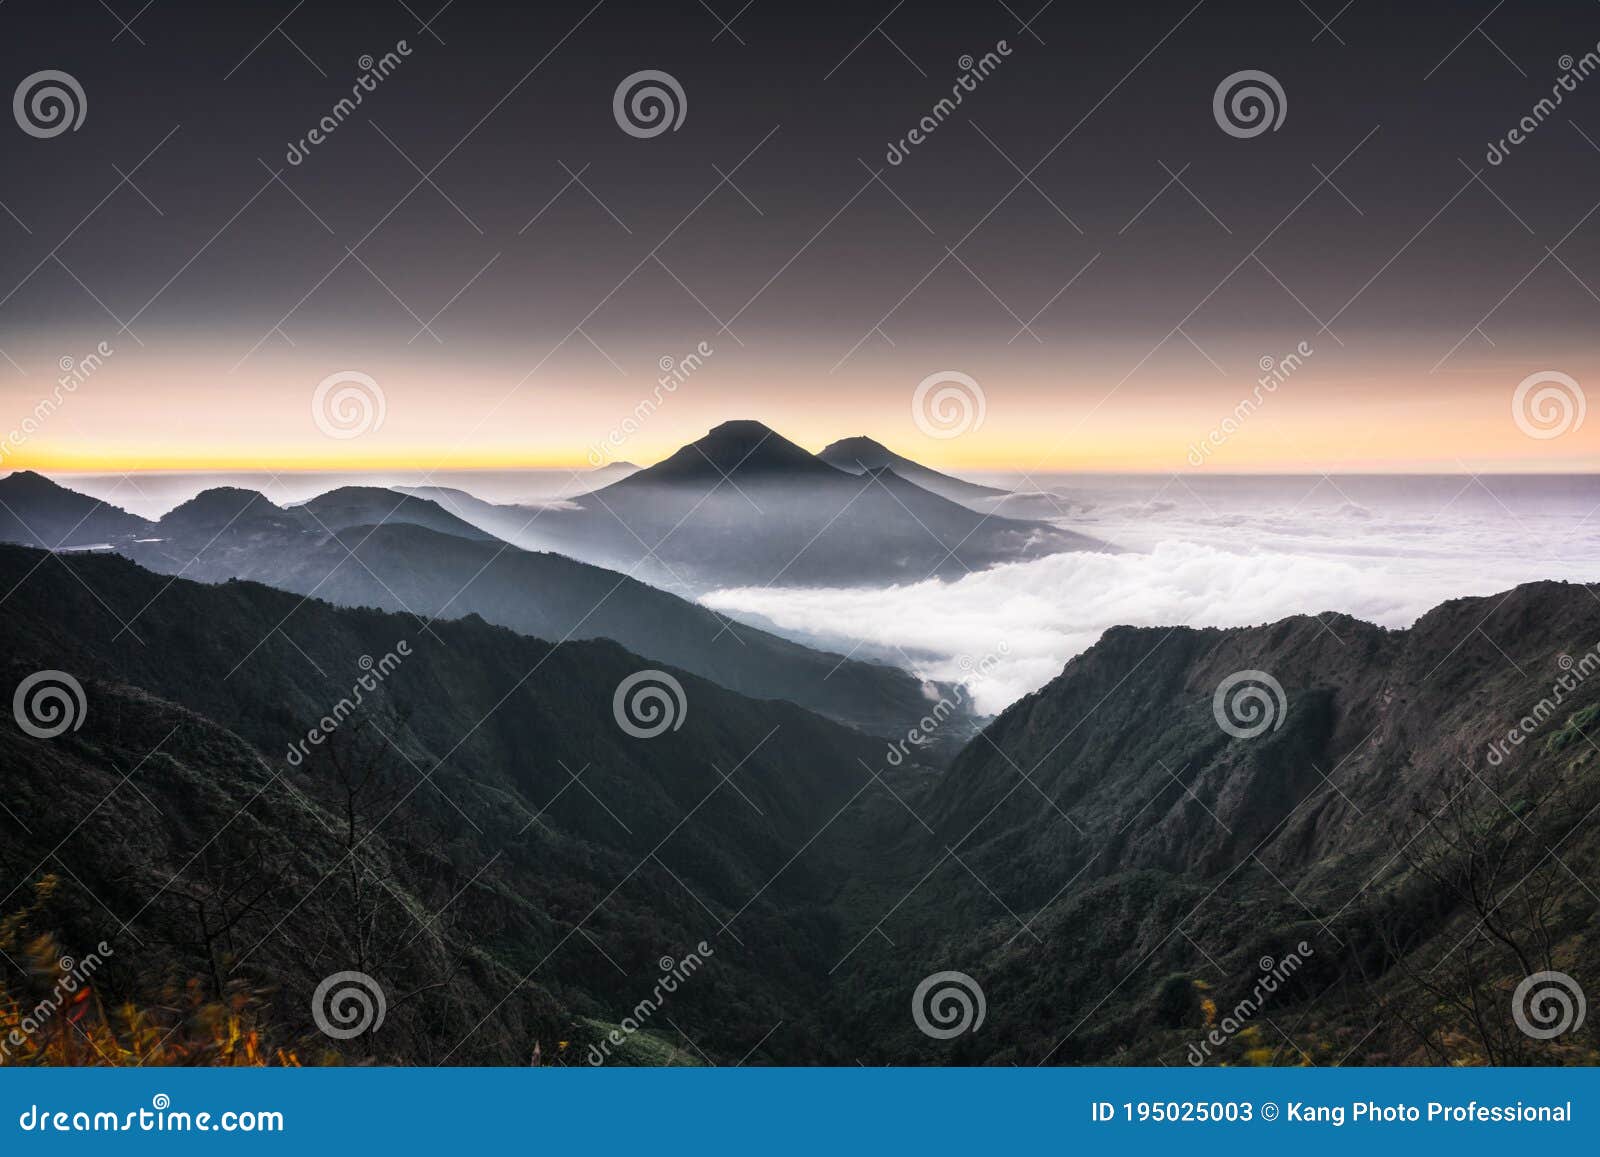 beautiful view fog covers mount sindoro sumbing. view from the top of bismo hill when golden hours